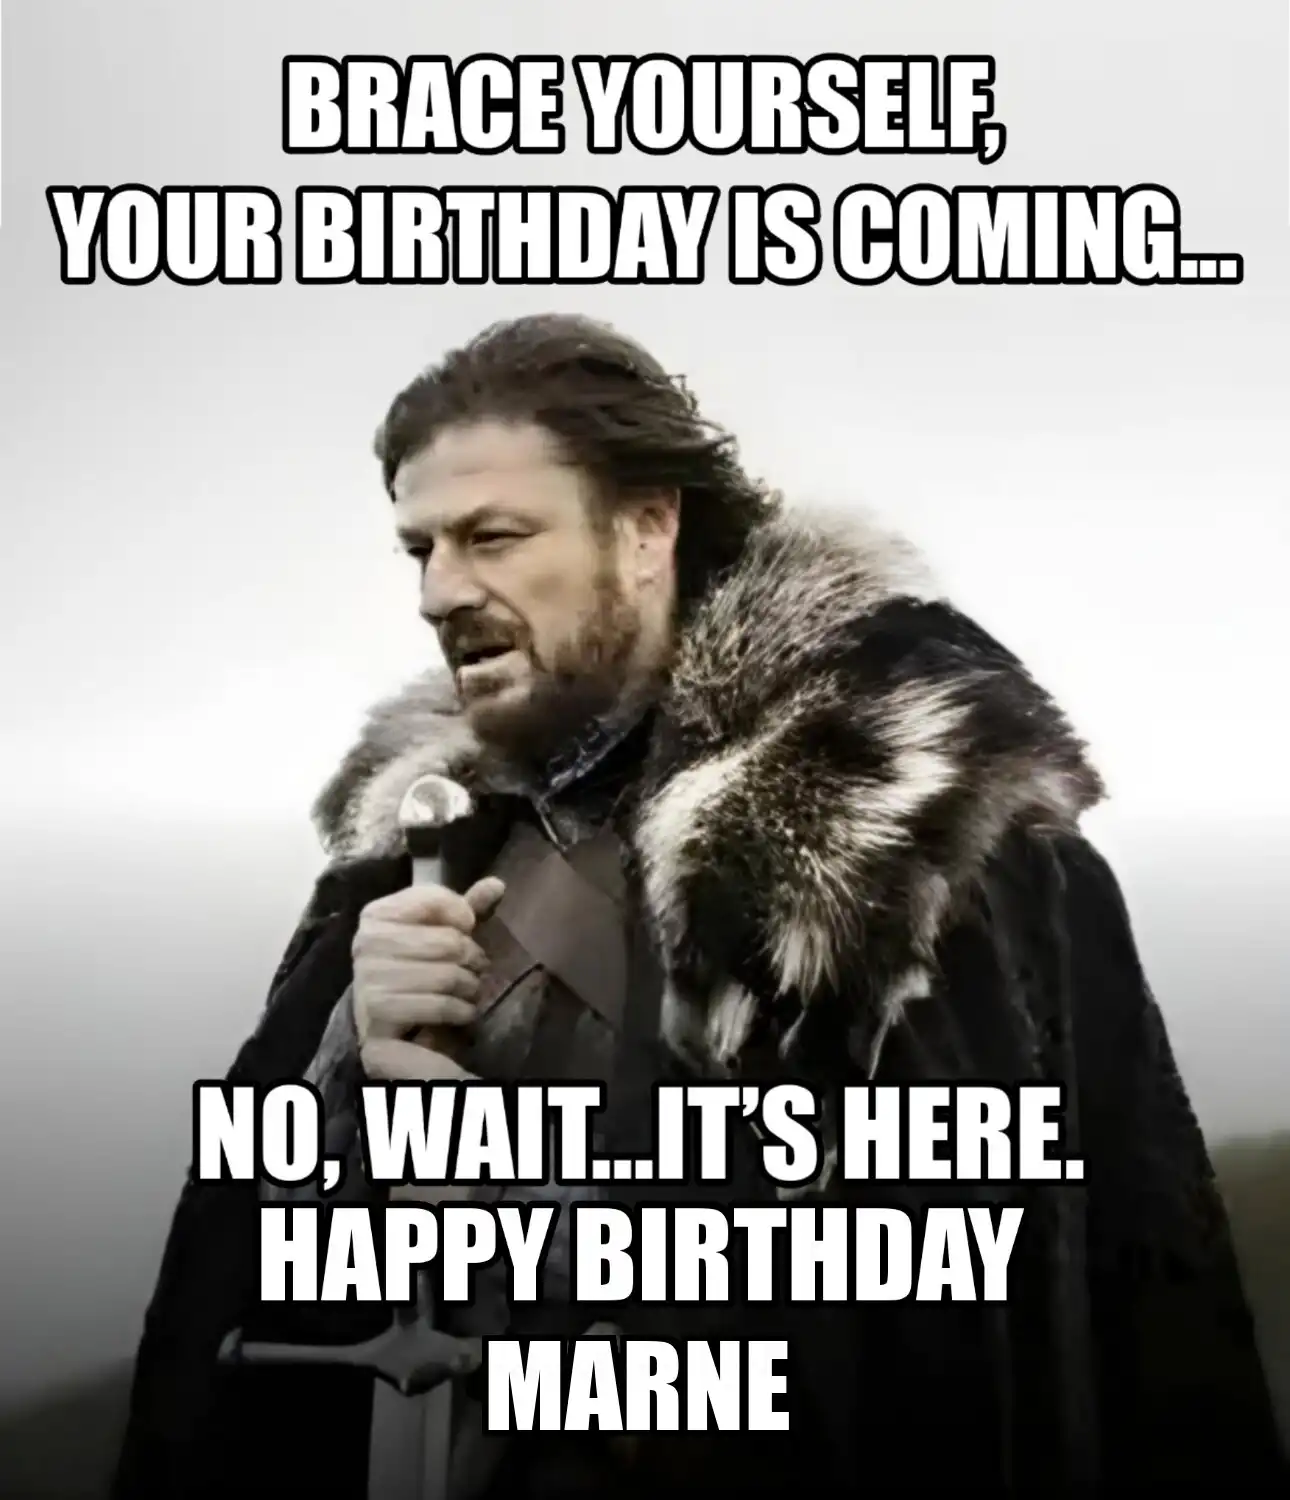 Happy Birthday Marne Brace Yourself Your Birthday Is Coming Meme